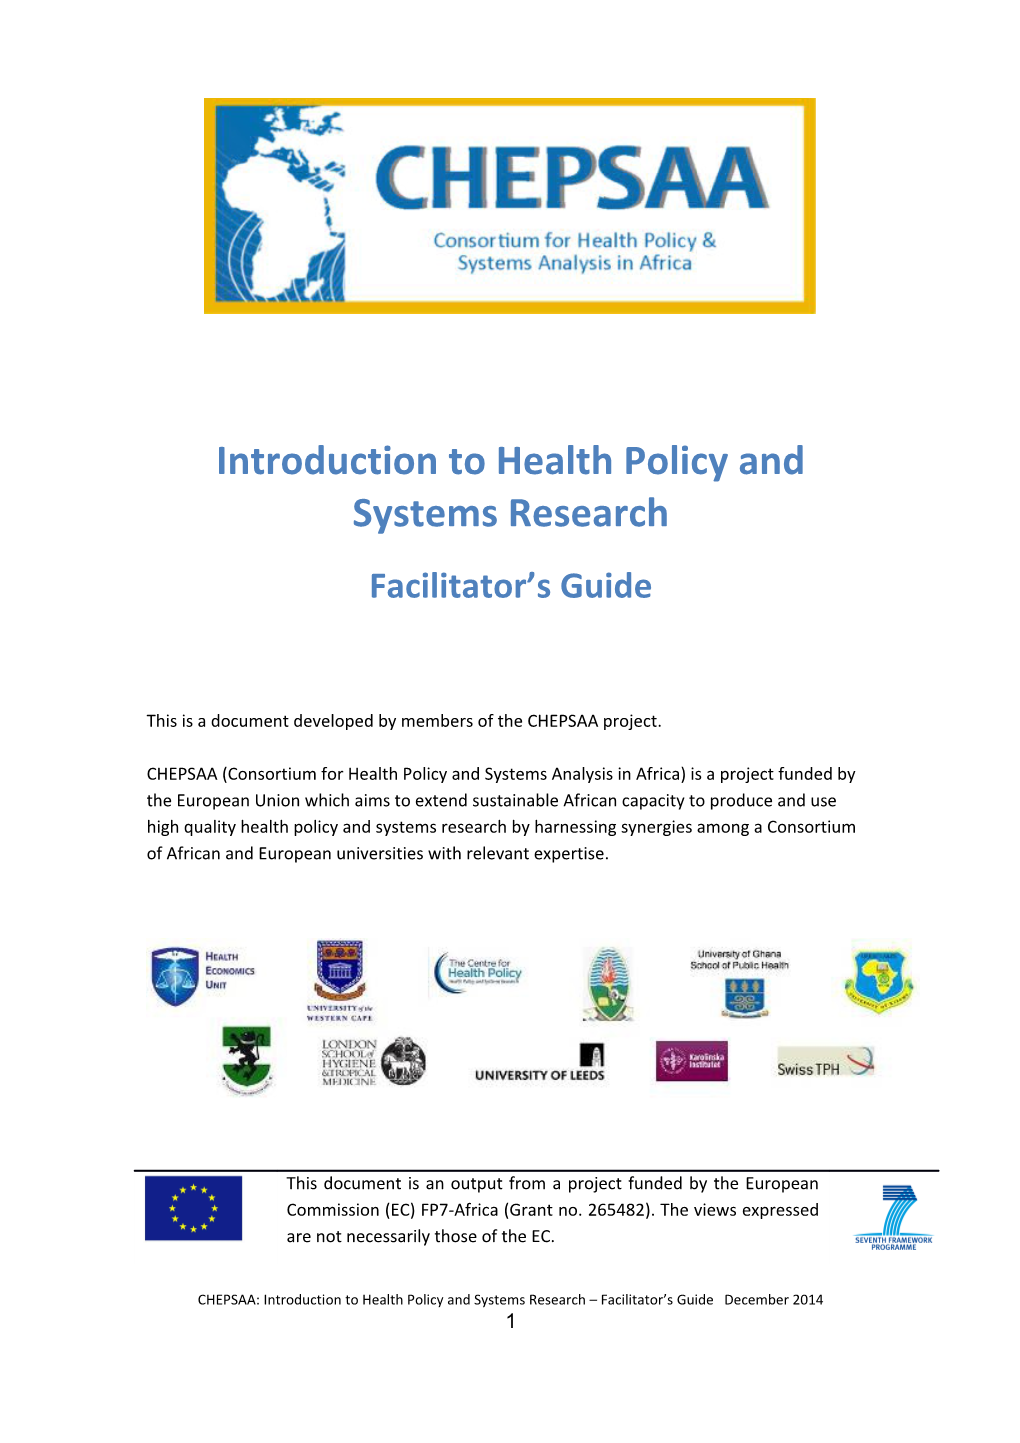 Introduction to Health Policy and Systems Research